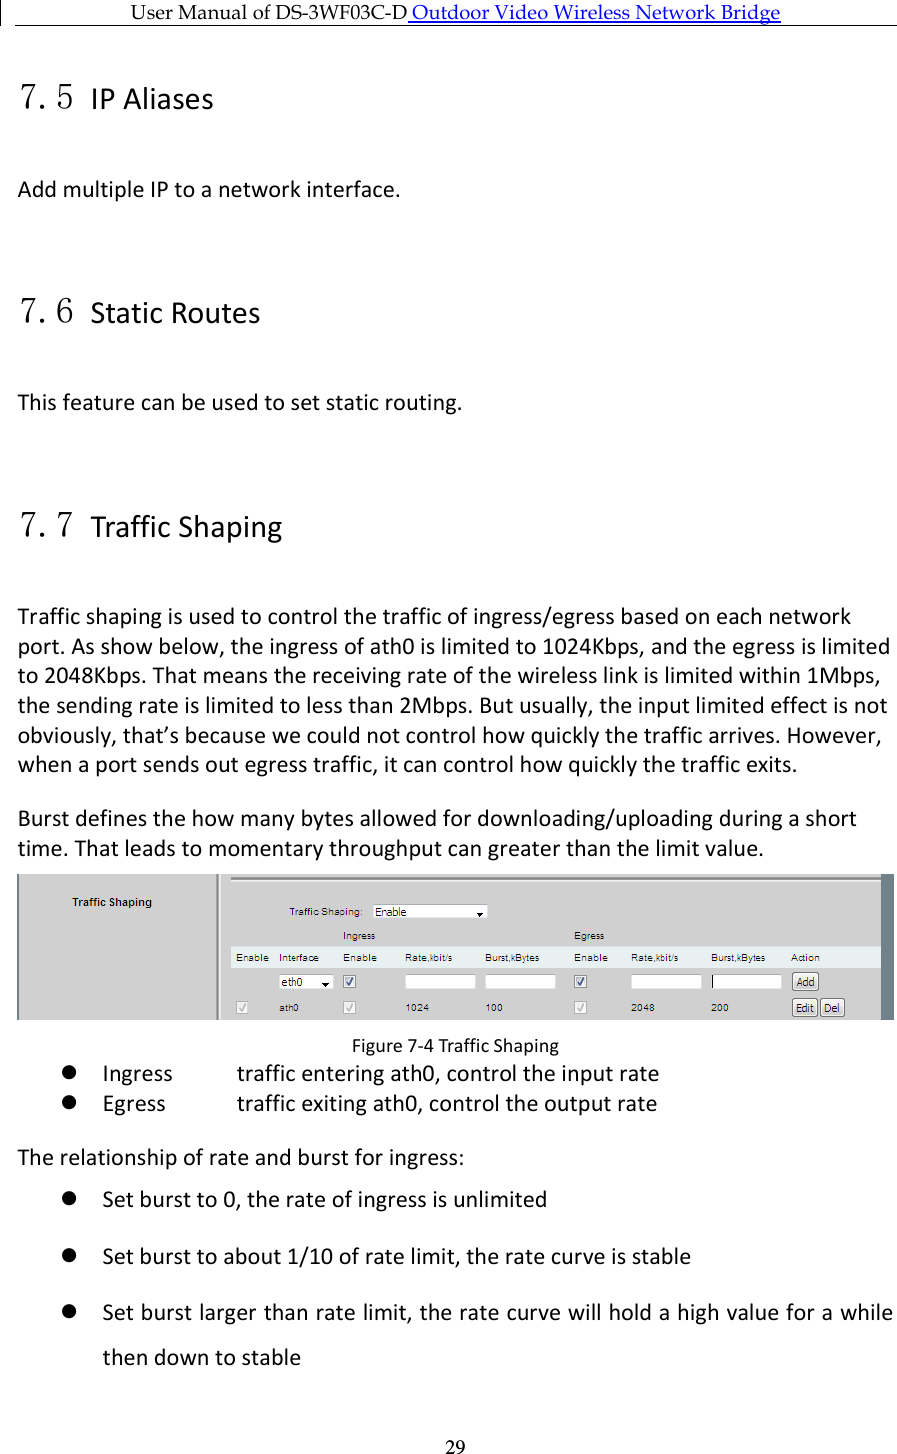 User Manual of DS-3WF03C-D Outdoor Video Wireless Network Bridge      297.5 IP Aliases Add multiple IP to a network interface.  7.6 Static Routes This feature can be used to set static routing.  7.7 Traffic Shaping Traffic shaping is used to control the traffic of ingress/egress based on each network port. As show below, the ingress of ath0 is limited to 1024Kbps, and the egress is limited to 2048Kbps. That means the receiving rate of the wireless link is limited within 1Mbps, the sending rate is limited to less than 2Mbps. But usually, the input limited effect is not obviously, that’s because we could not control how quickly the traffic arrives. However, when a port sends out egress traffic, it can control how quickly the traffic exits. Burst defines the how many bytes allowed for downloading/uploading during a short time. That leads to momentary throughput can greater than the limit value.  Figure 7-4 Traffic Shaping  Ingress  traffic entering ath0, control the input rate  Egress  traffic exiting ath0, control the output rate The relationship of rate and burst for ingress:  Set burst to 0, the rate of ingress is unlimited  Set burst to about 1/10 of rate limit, the rate curve is stable  Set burst larger than rate limit, the rate curve will hold a high value for a while then down to stable 